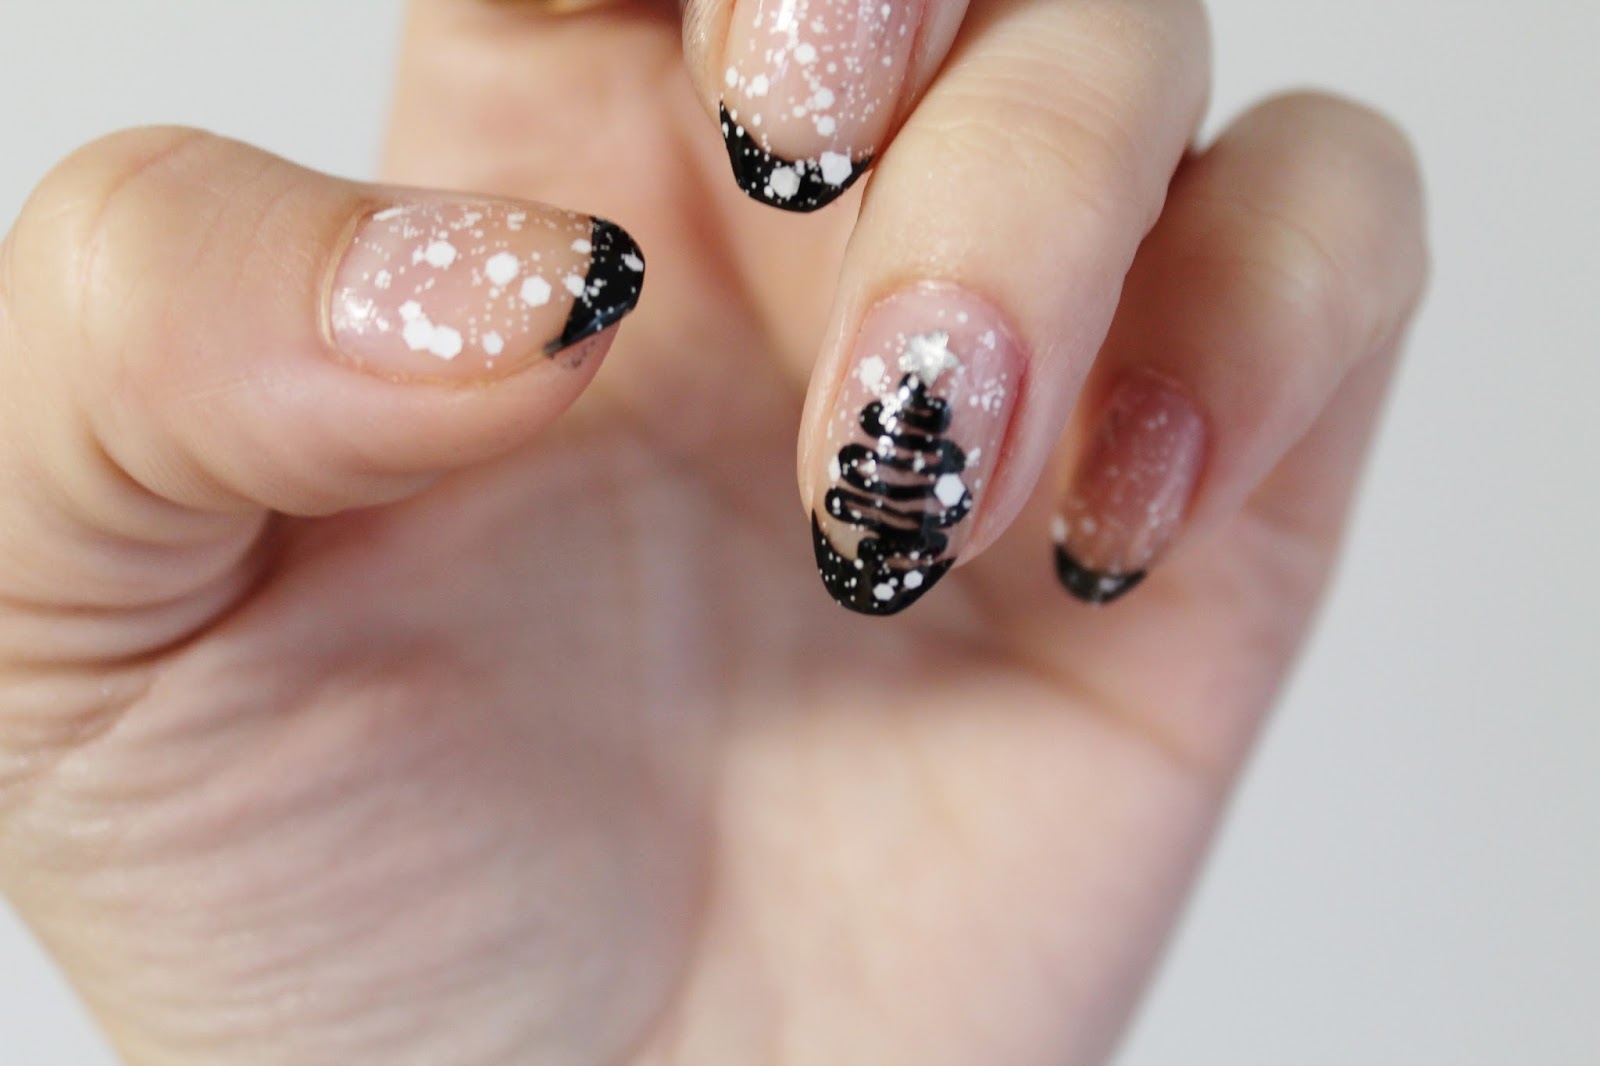 3. Black and White Christmas Nail Art - wide 8